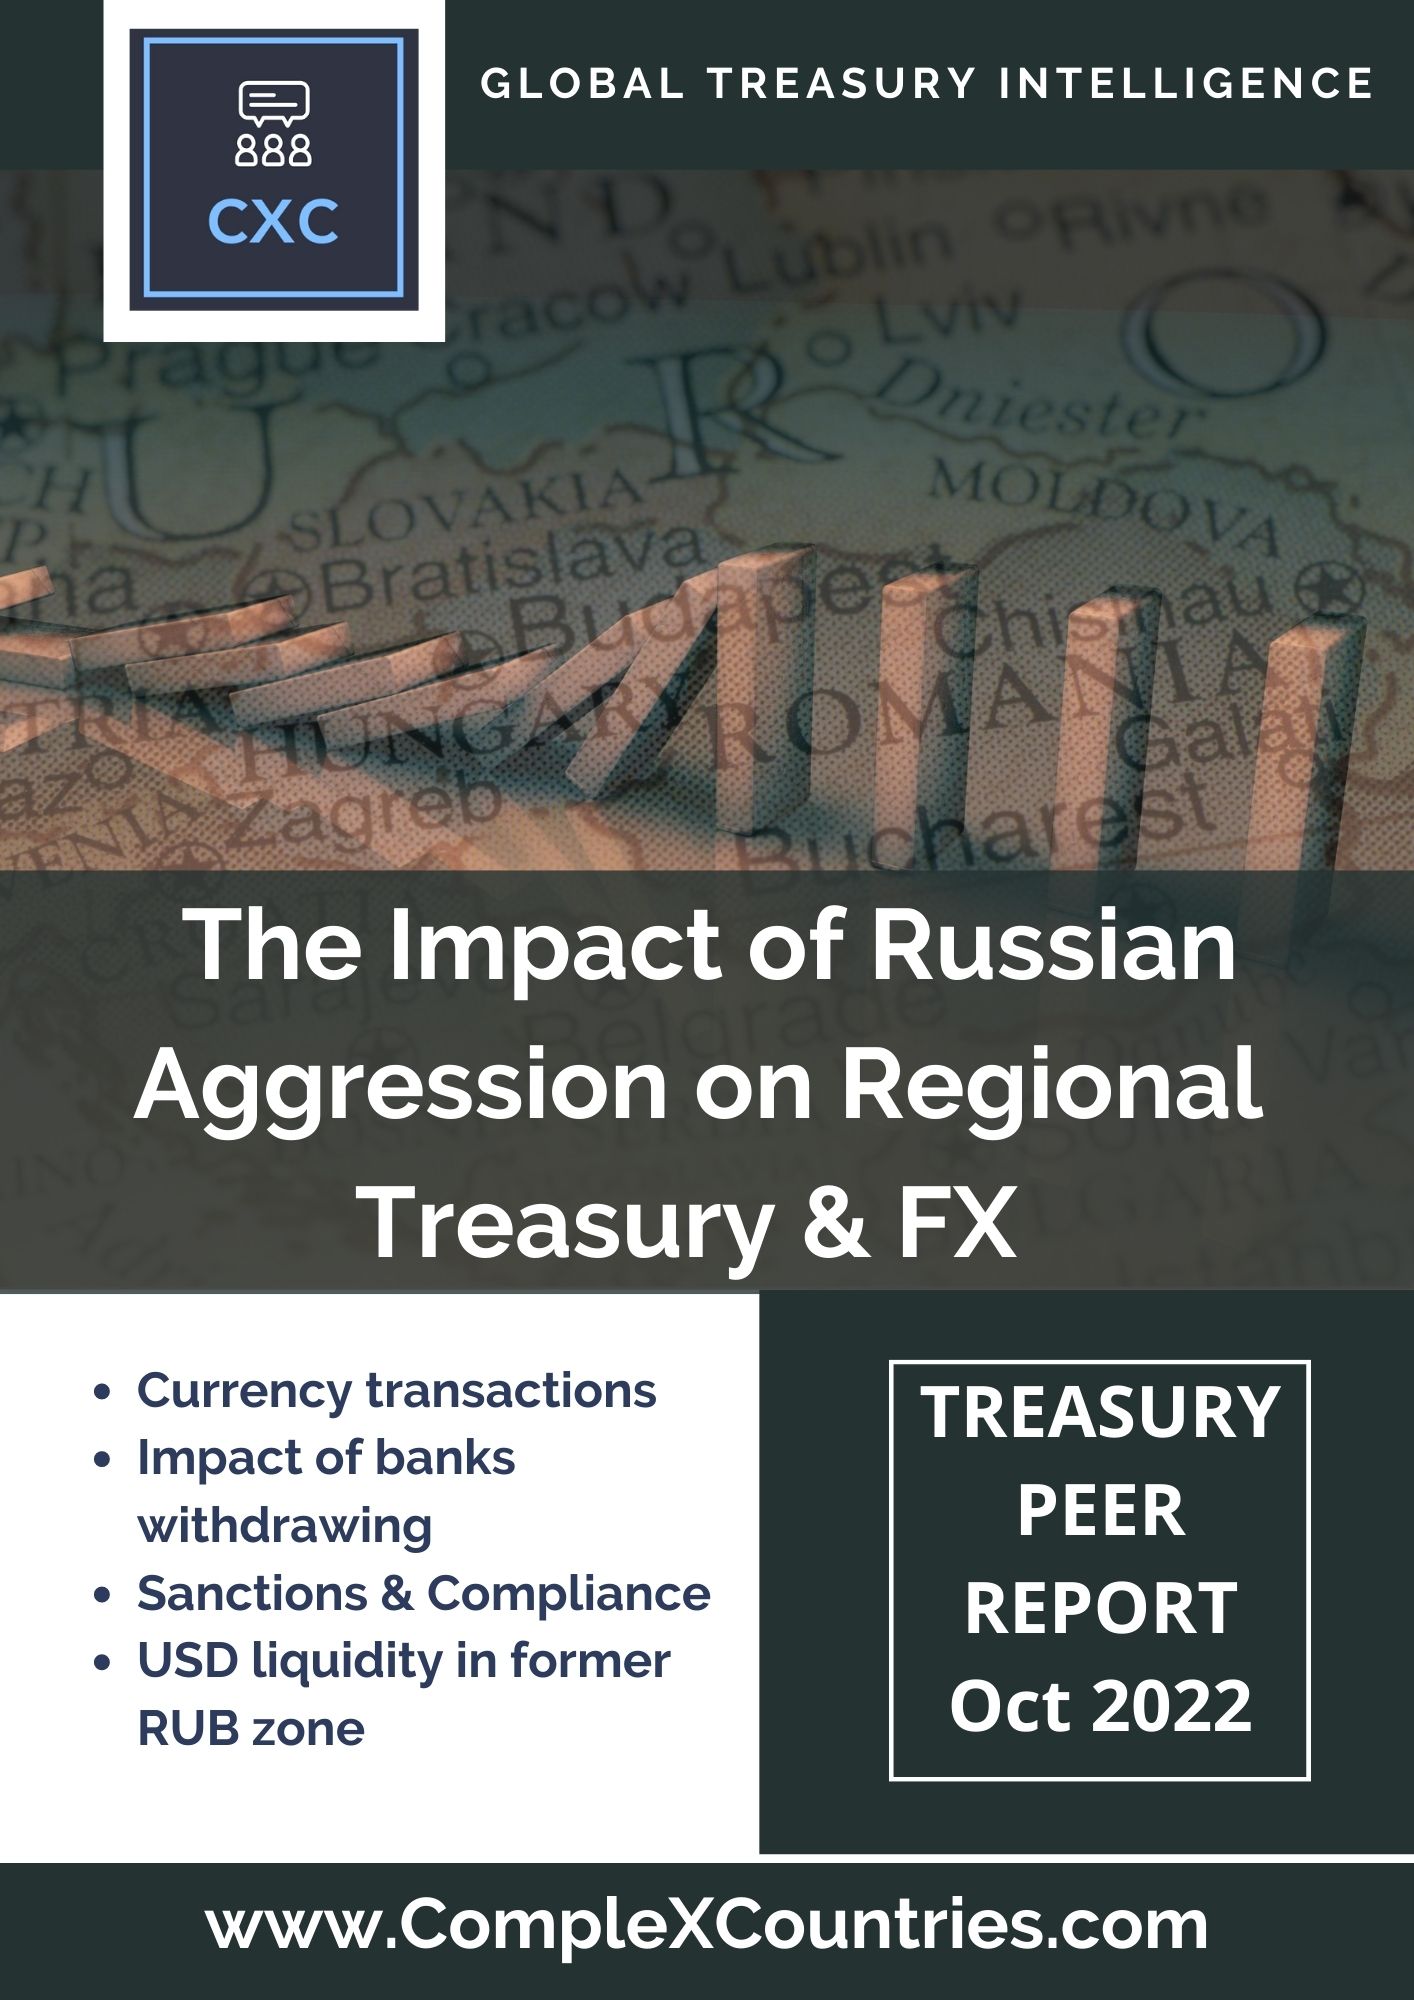 The Impact of Russian Aggression on Regional Treasury & FX